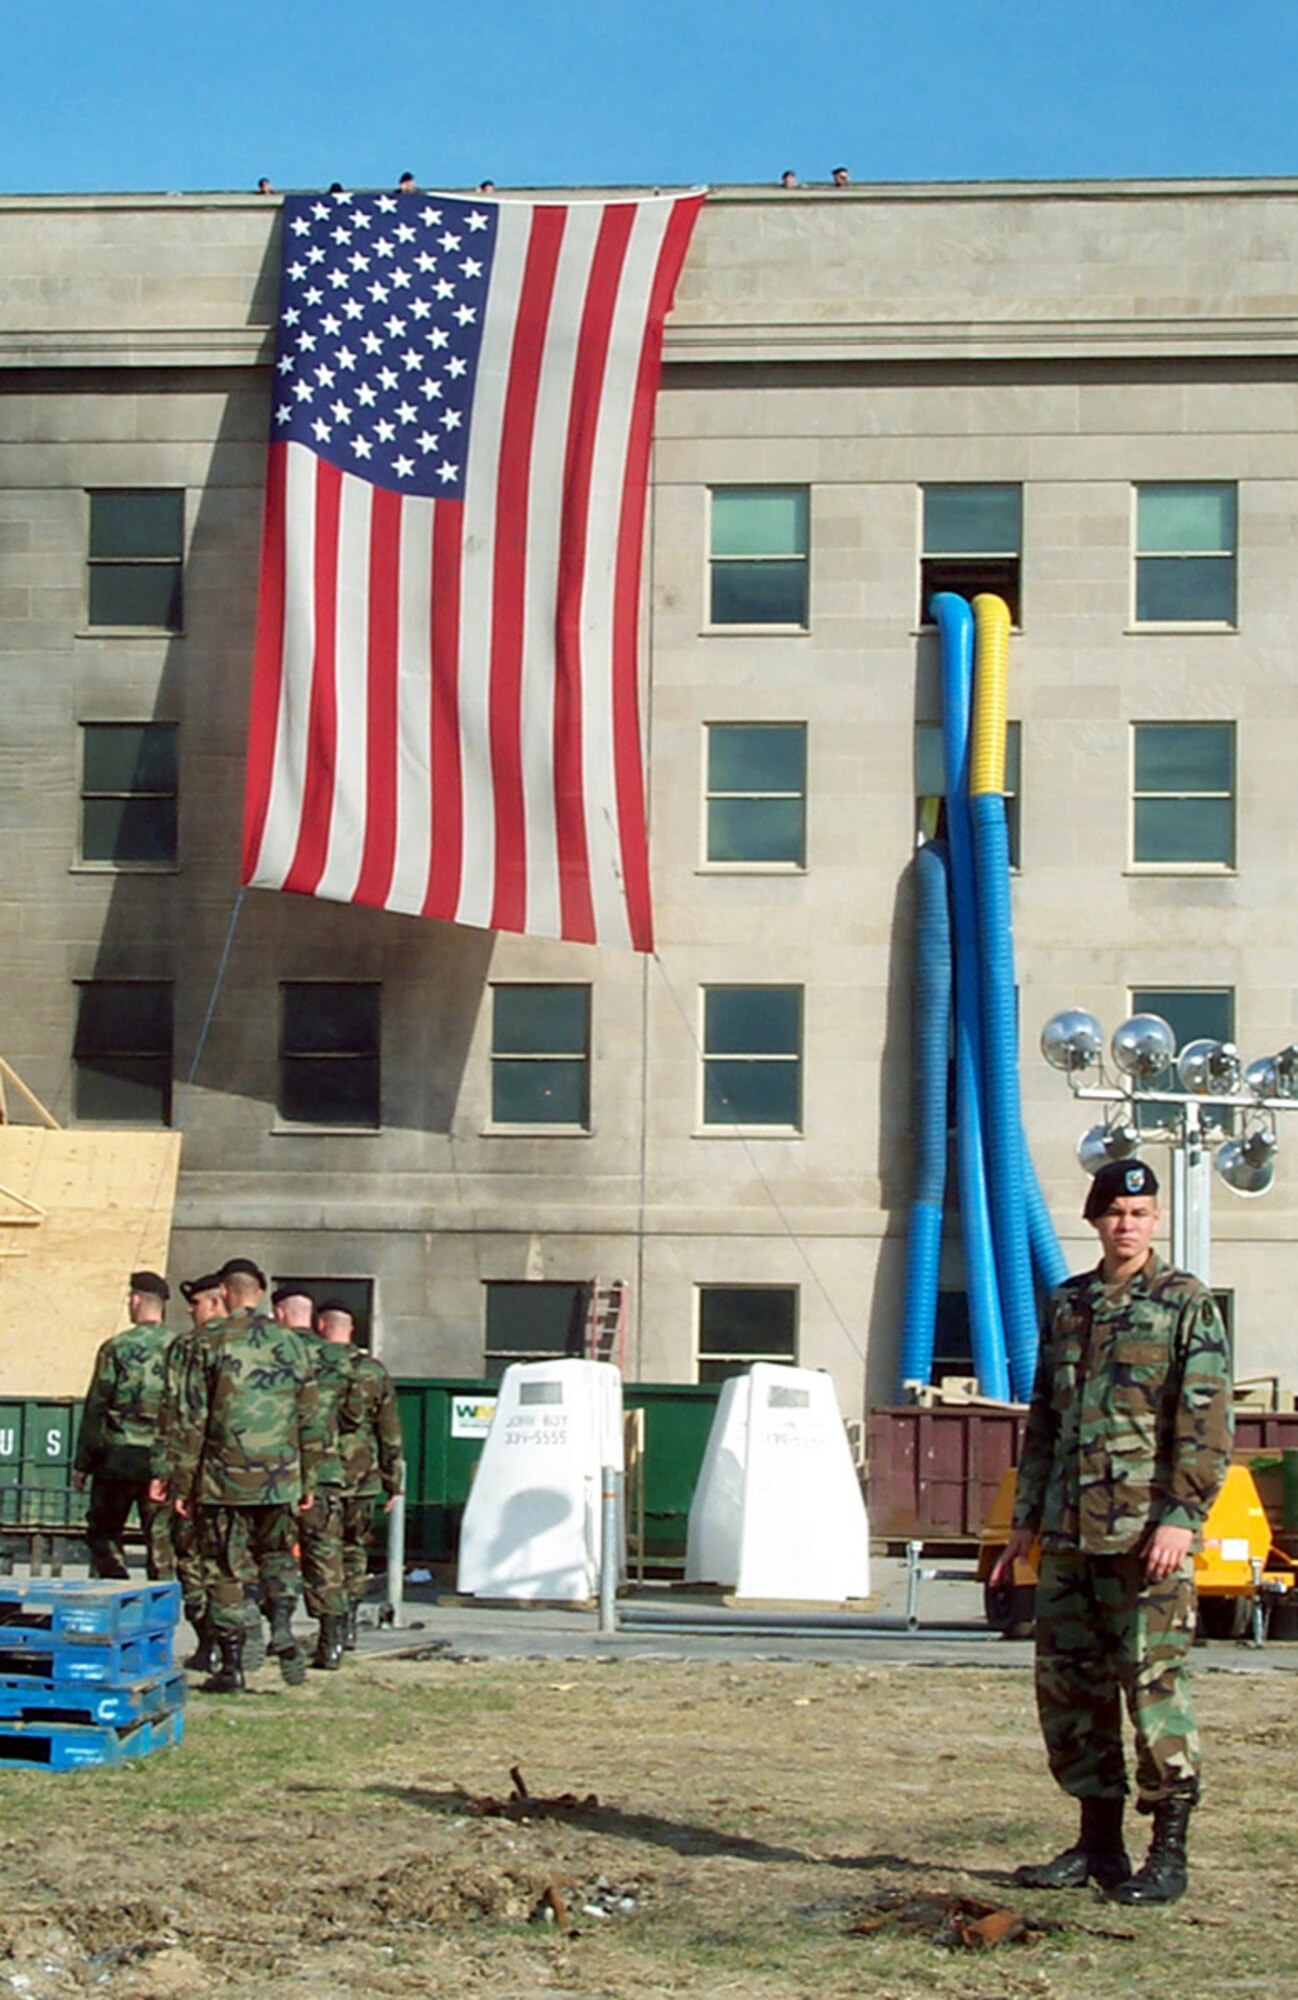 WASHINGTON -- Soldiers prepare to lower the garrison flag that draped the side of the Pentagon beside the impact site where terrorists crashed a hijacked airliner Sept. 11, 2001. The soldiers lowered and folded the flag Oct. 11, 2001. (U.S. Air Force photo by Jim Garamone)

